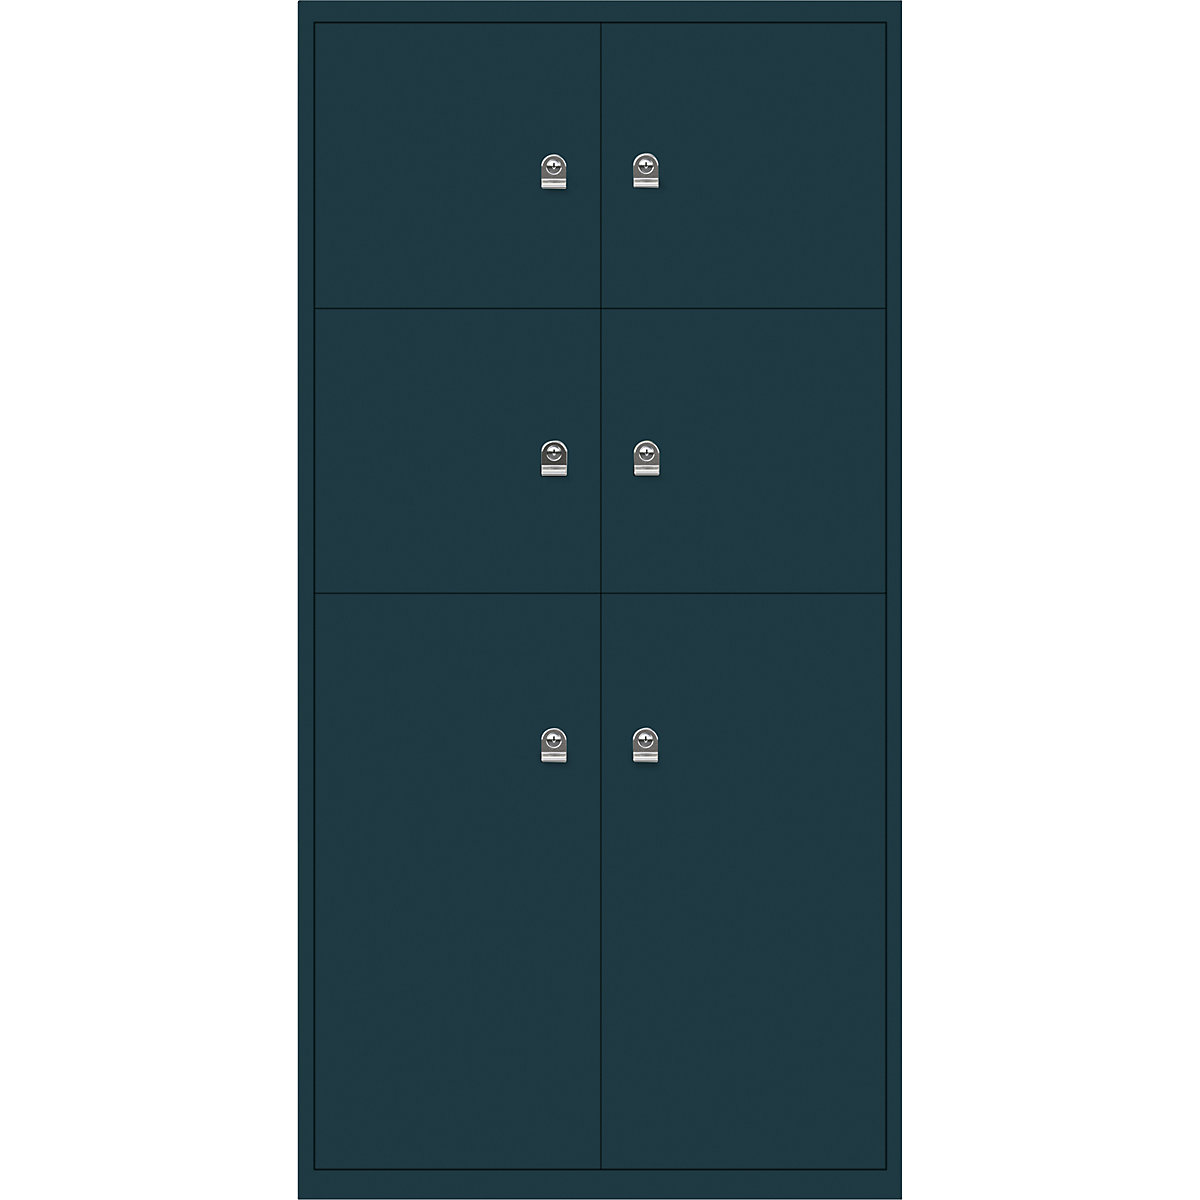 LateralFile™ lodge – BISLEY, with 6 lockable compartments, height 4 x 375 mm, 2 x 755 mm, ocean-8